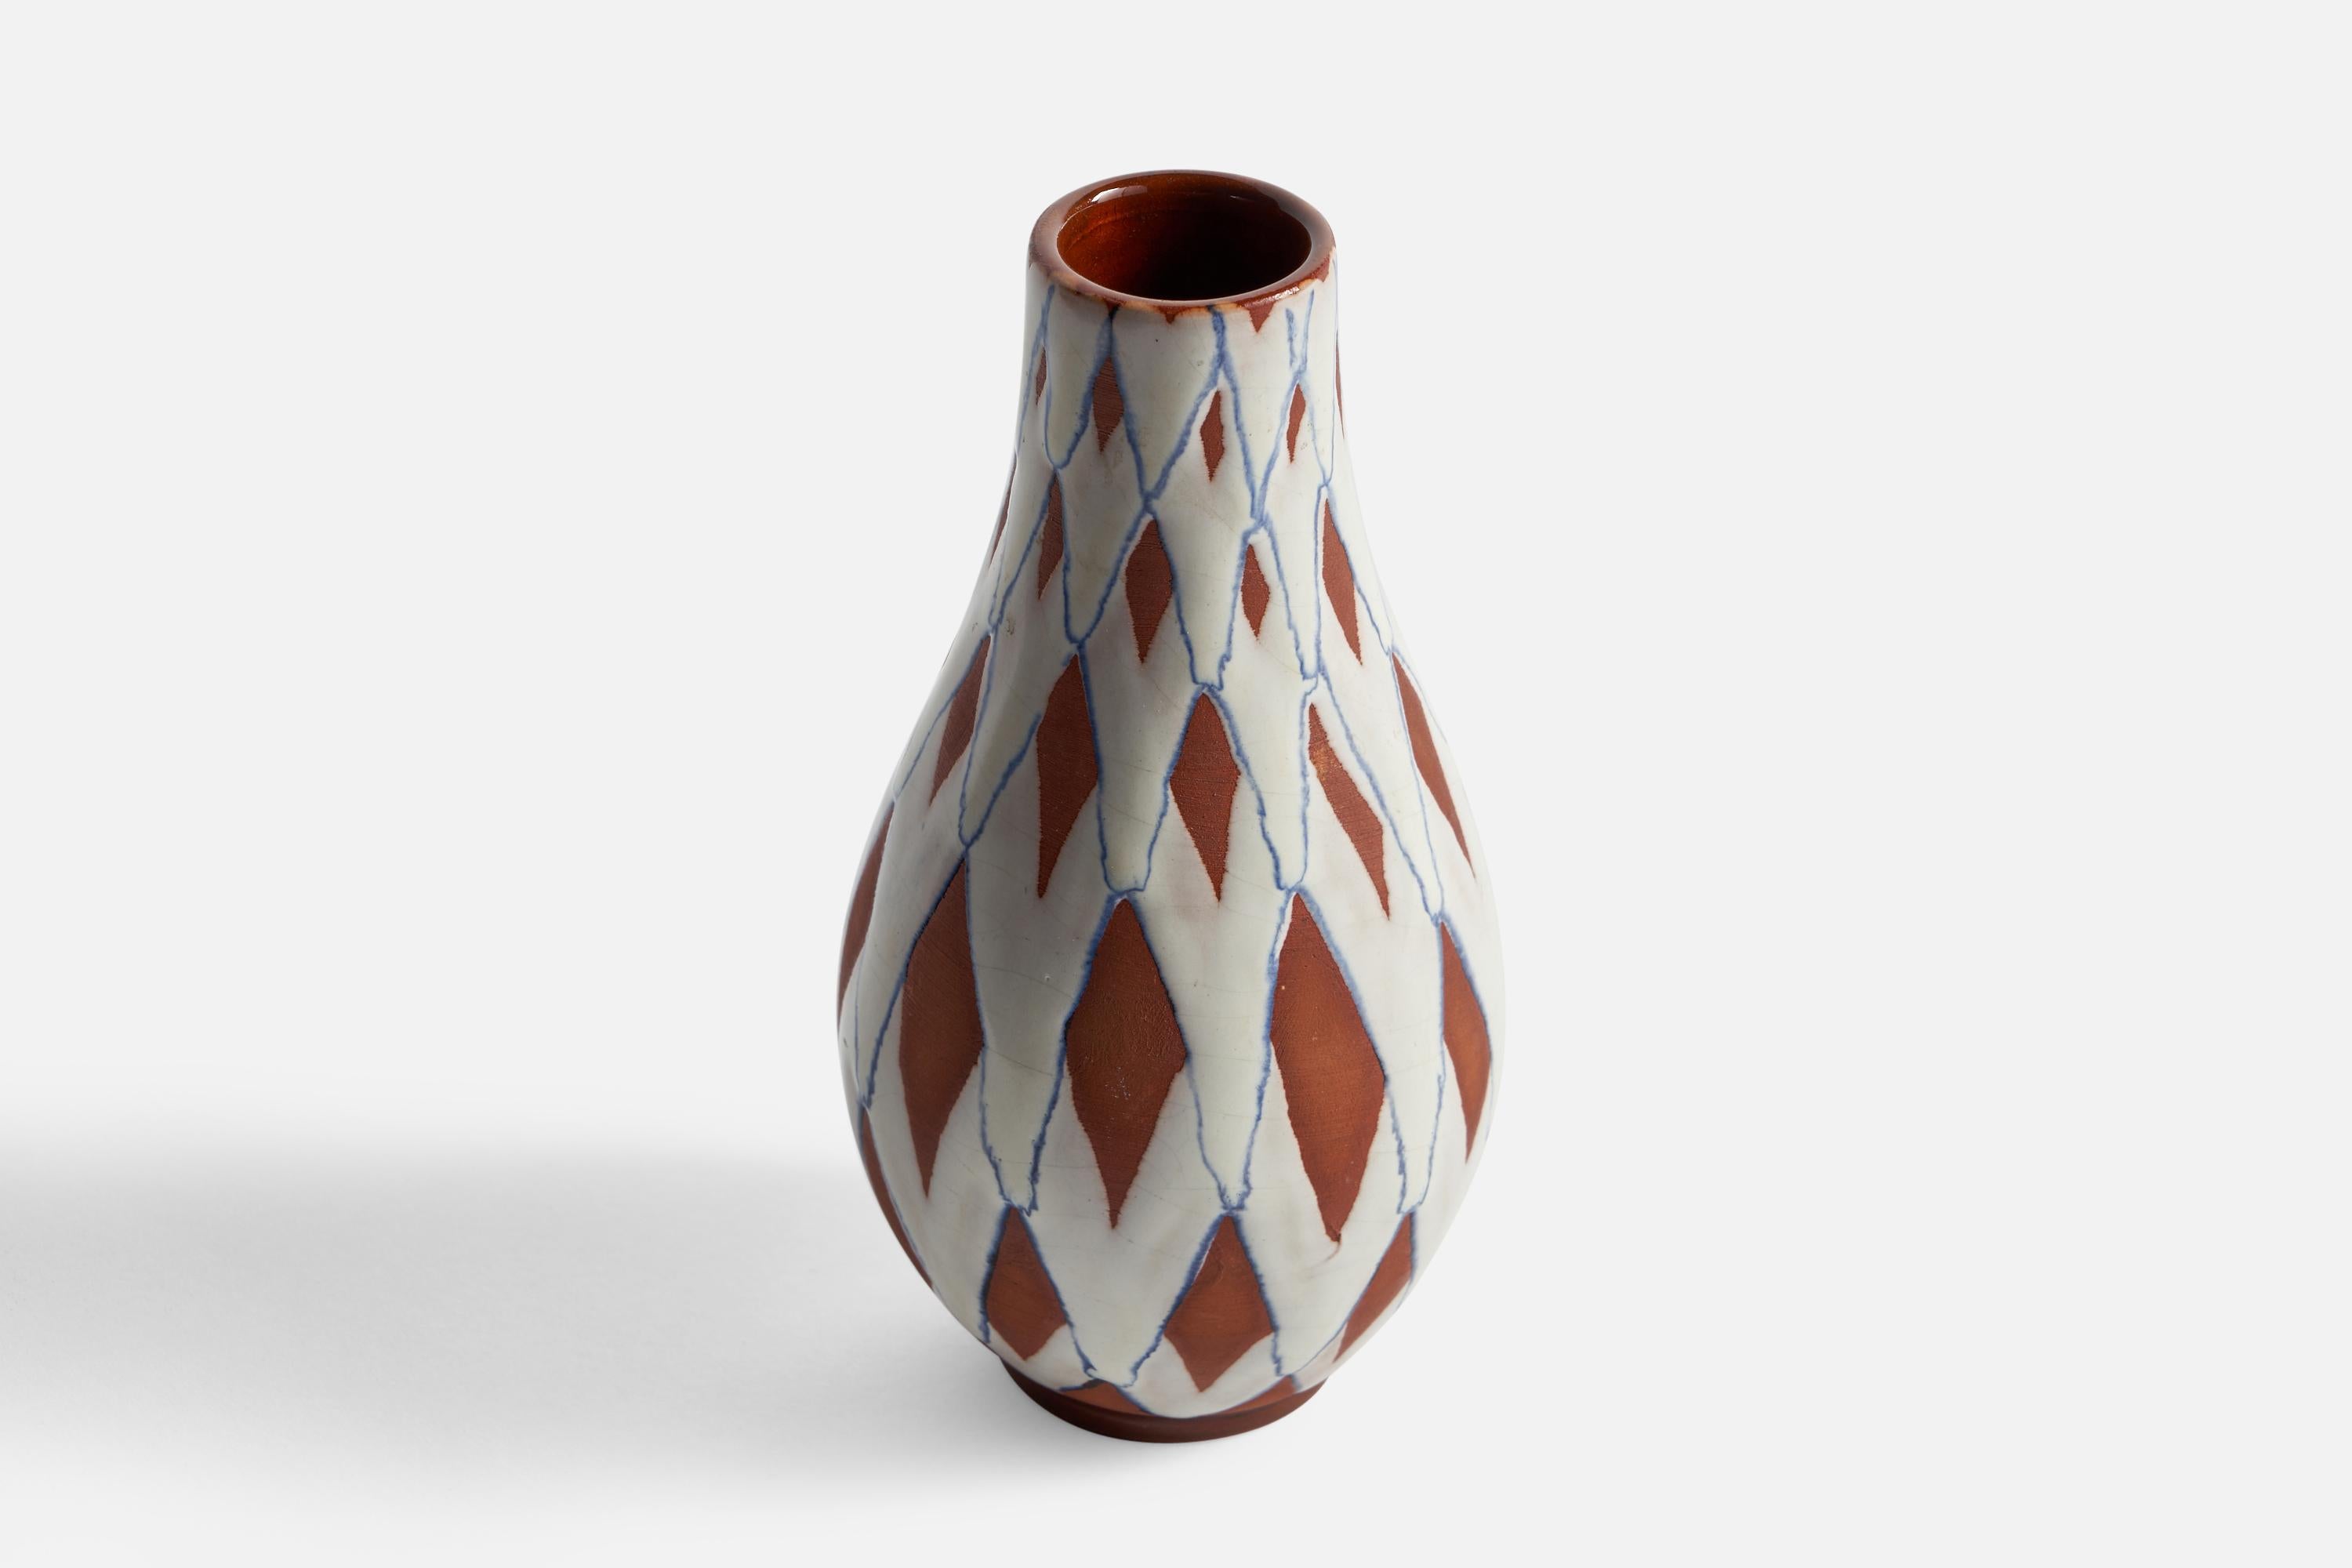 A hand-painted red, white and blue vase designed and produced by Gabriel Keramik, Sweden, 1940s.